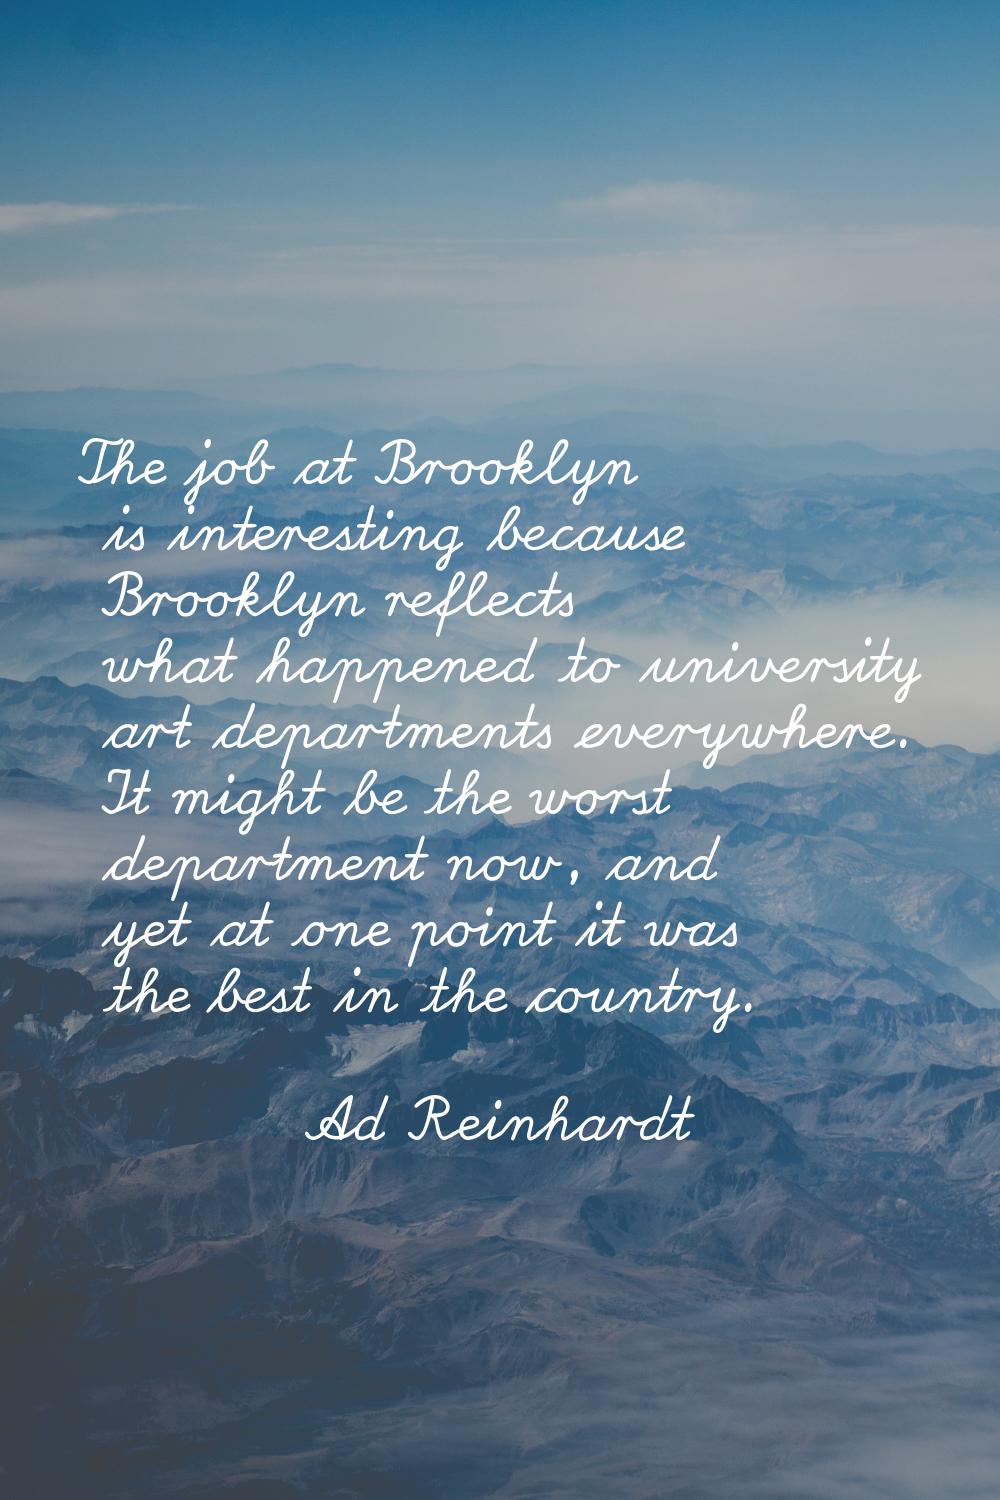 The job at Brooklyn is interesting because Brooklyn reflects what happened to university art depart